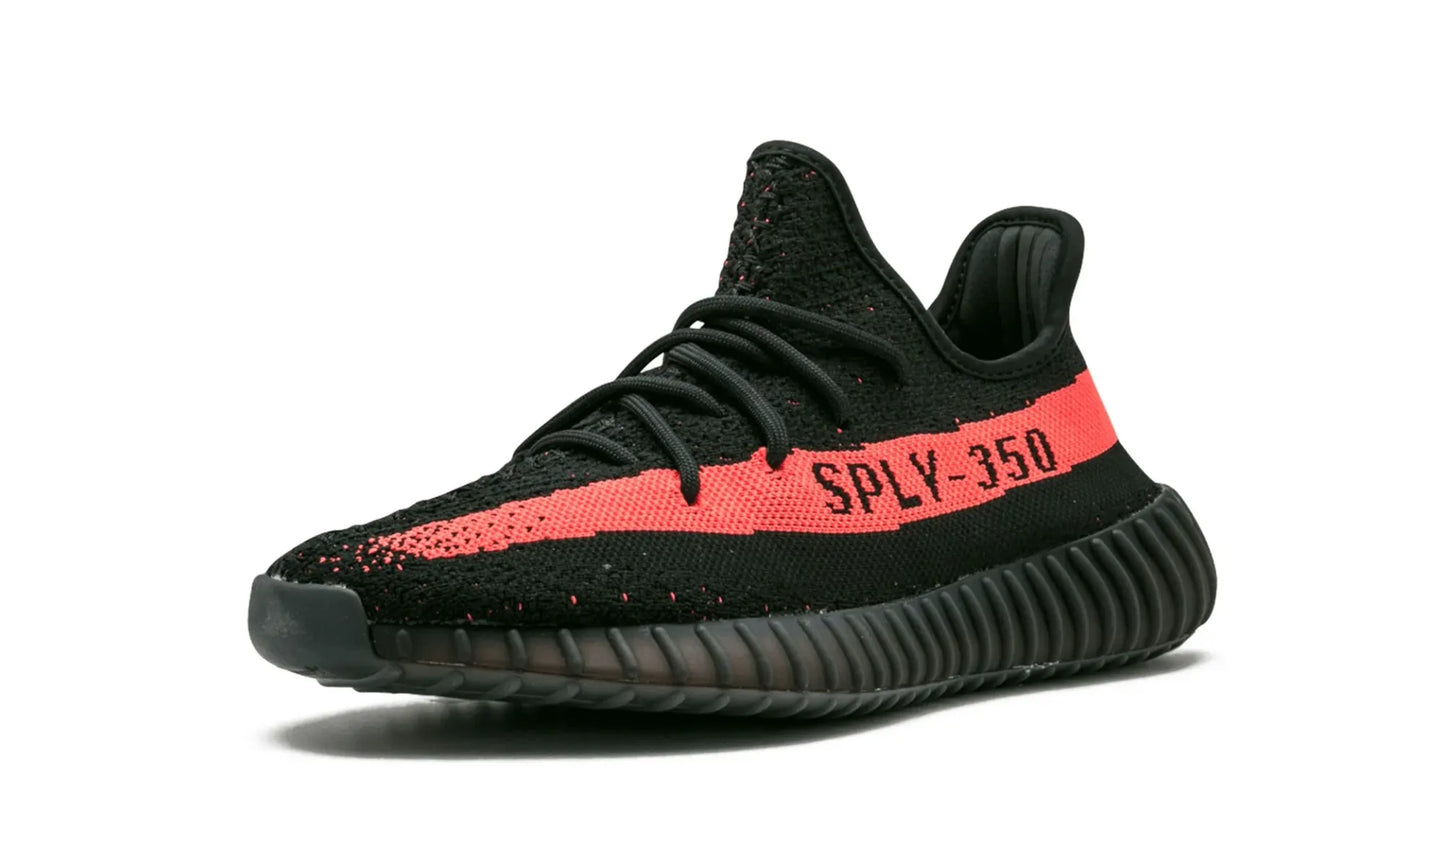 Adidas Yeezy Boost 350 V2 Core Black Red (2016/2022/2023)